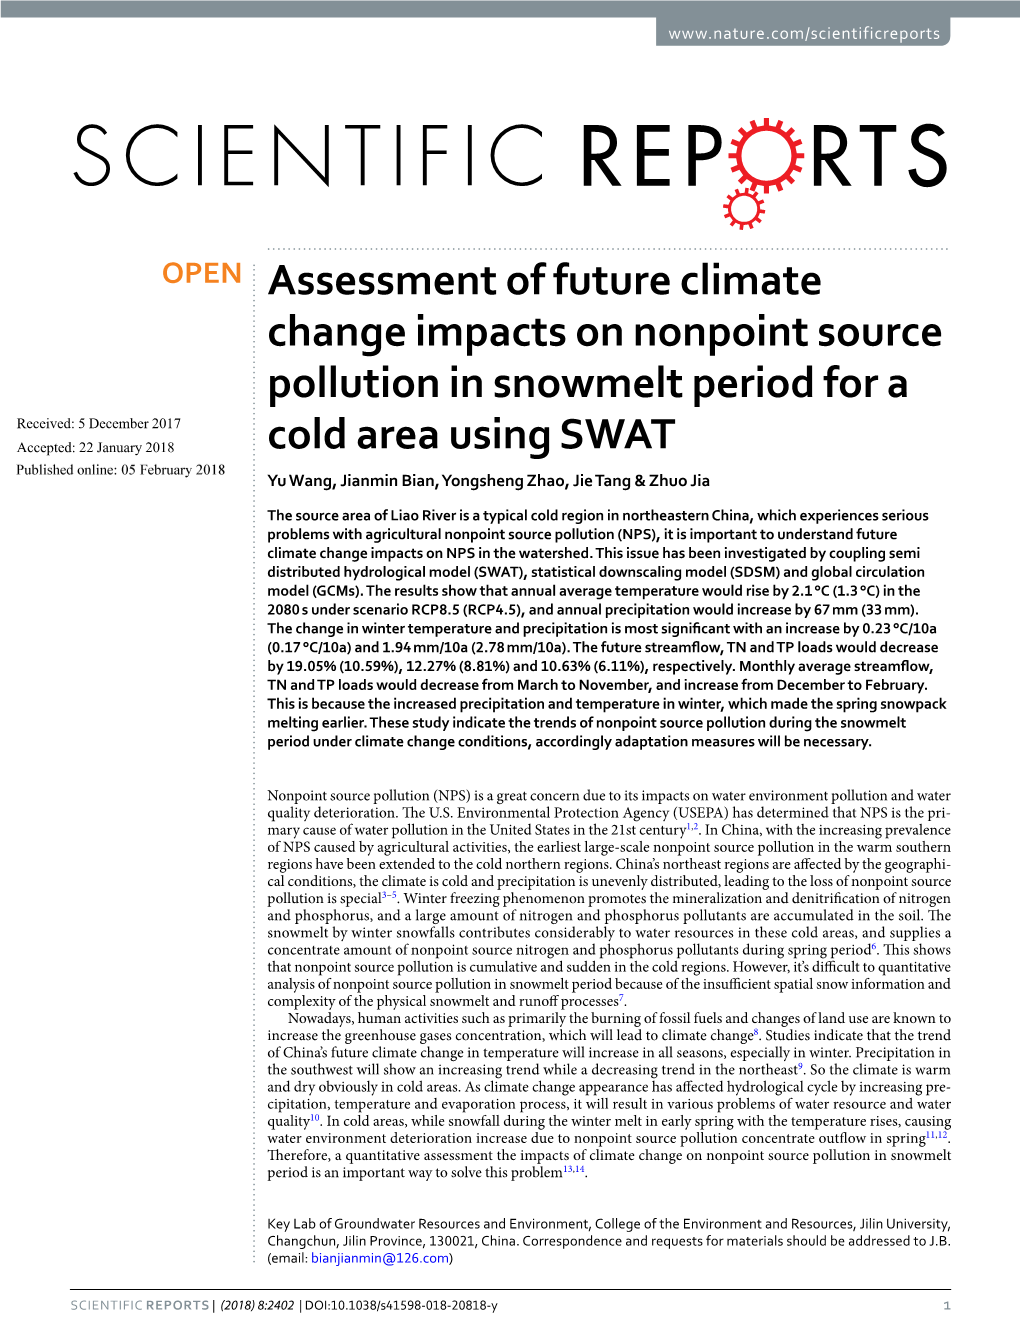 Assessment of Future Climate Change Impacts on Nonpoint Source